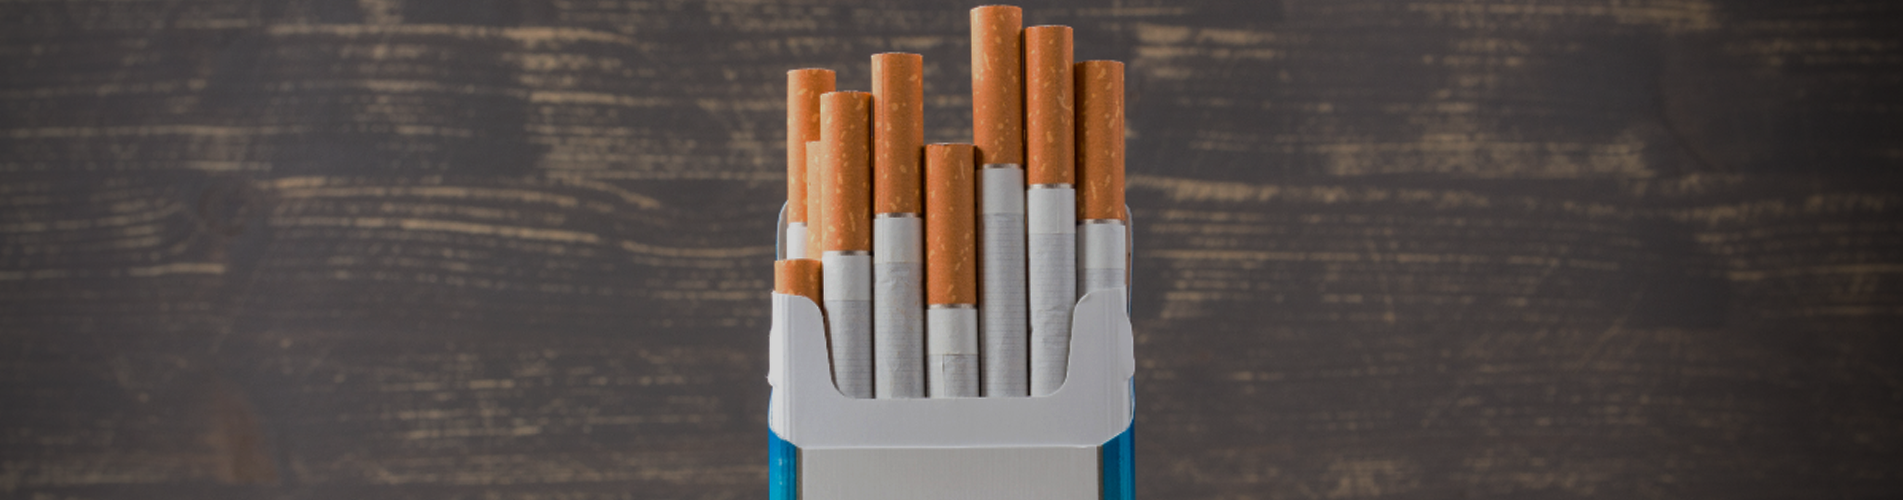 cigarettes in a packet